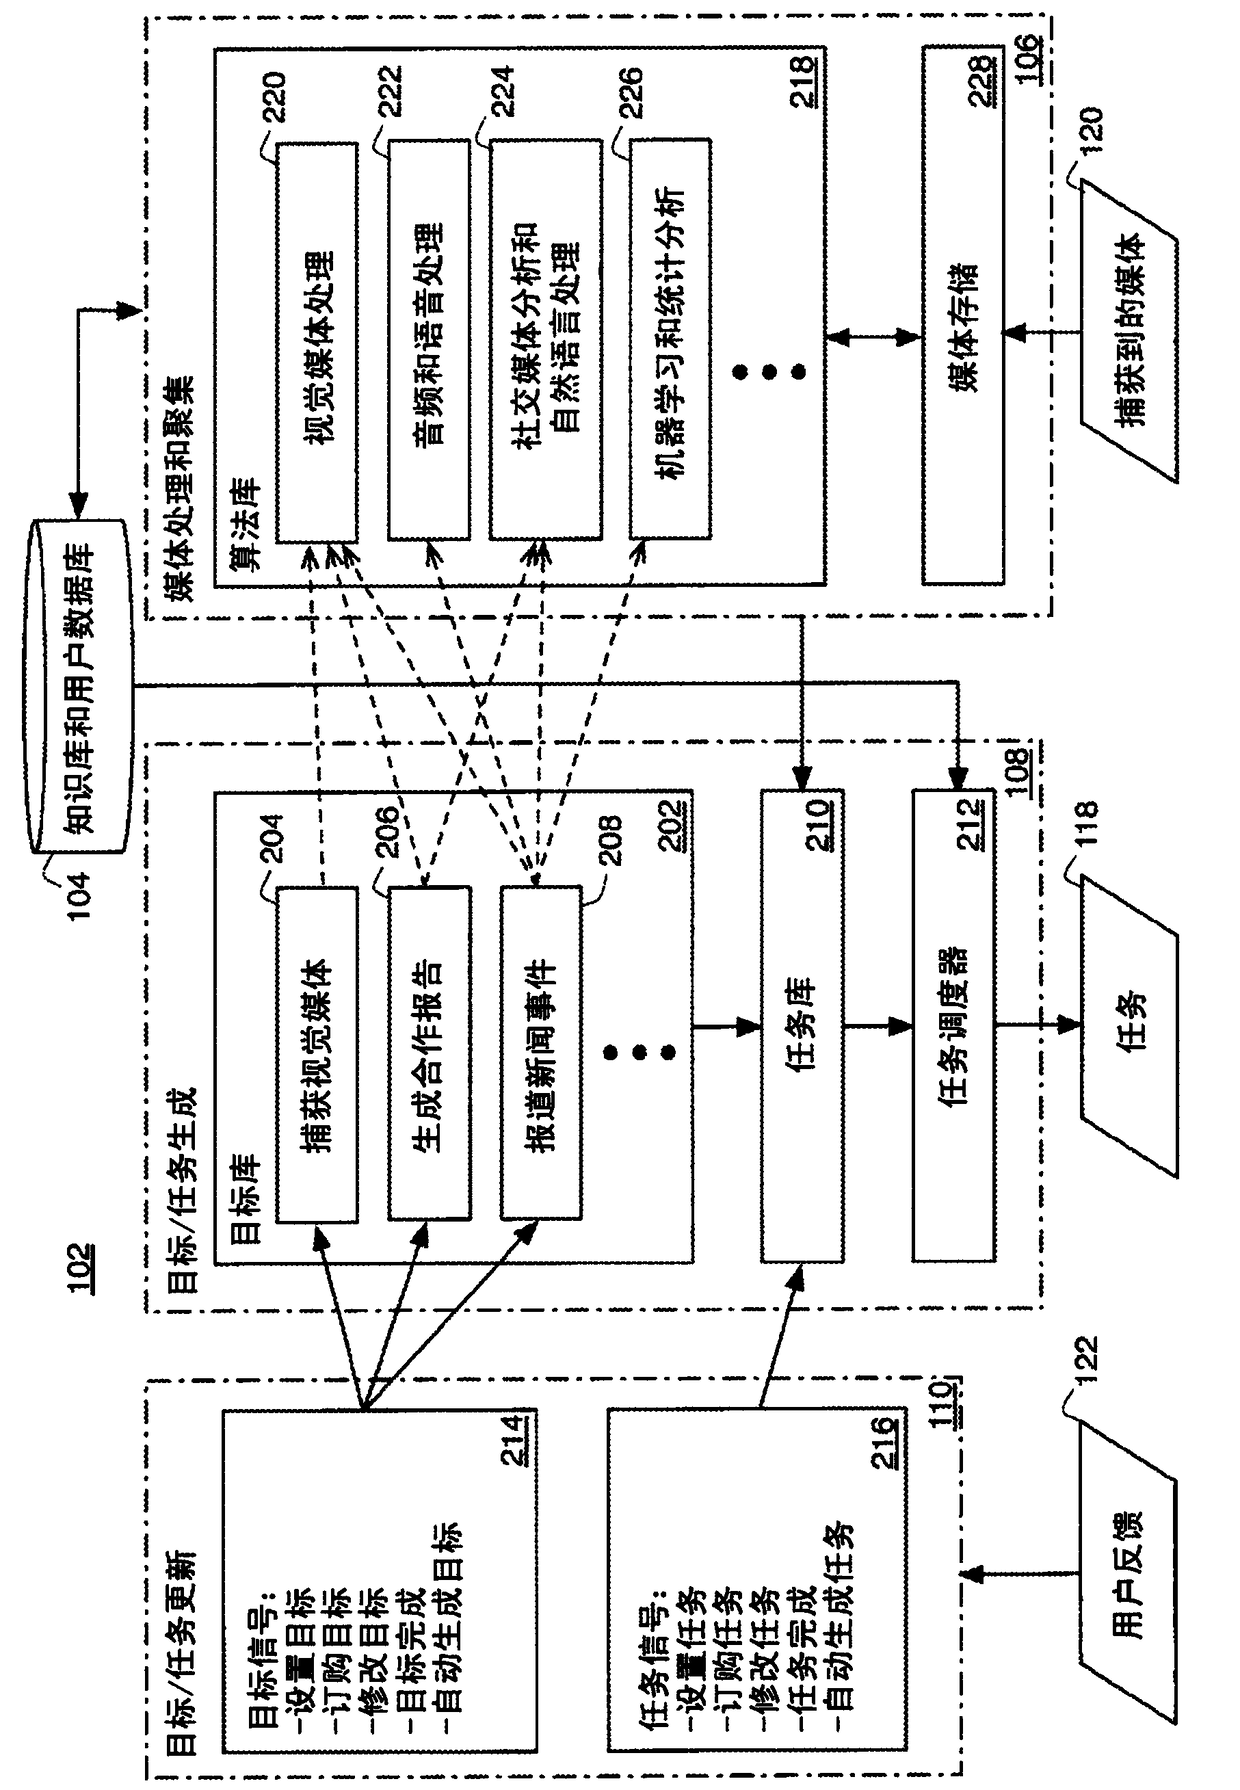 Collaborative media collection system and method